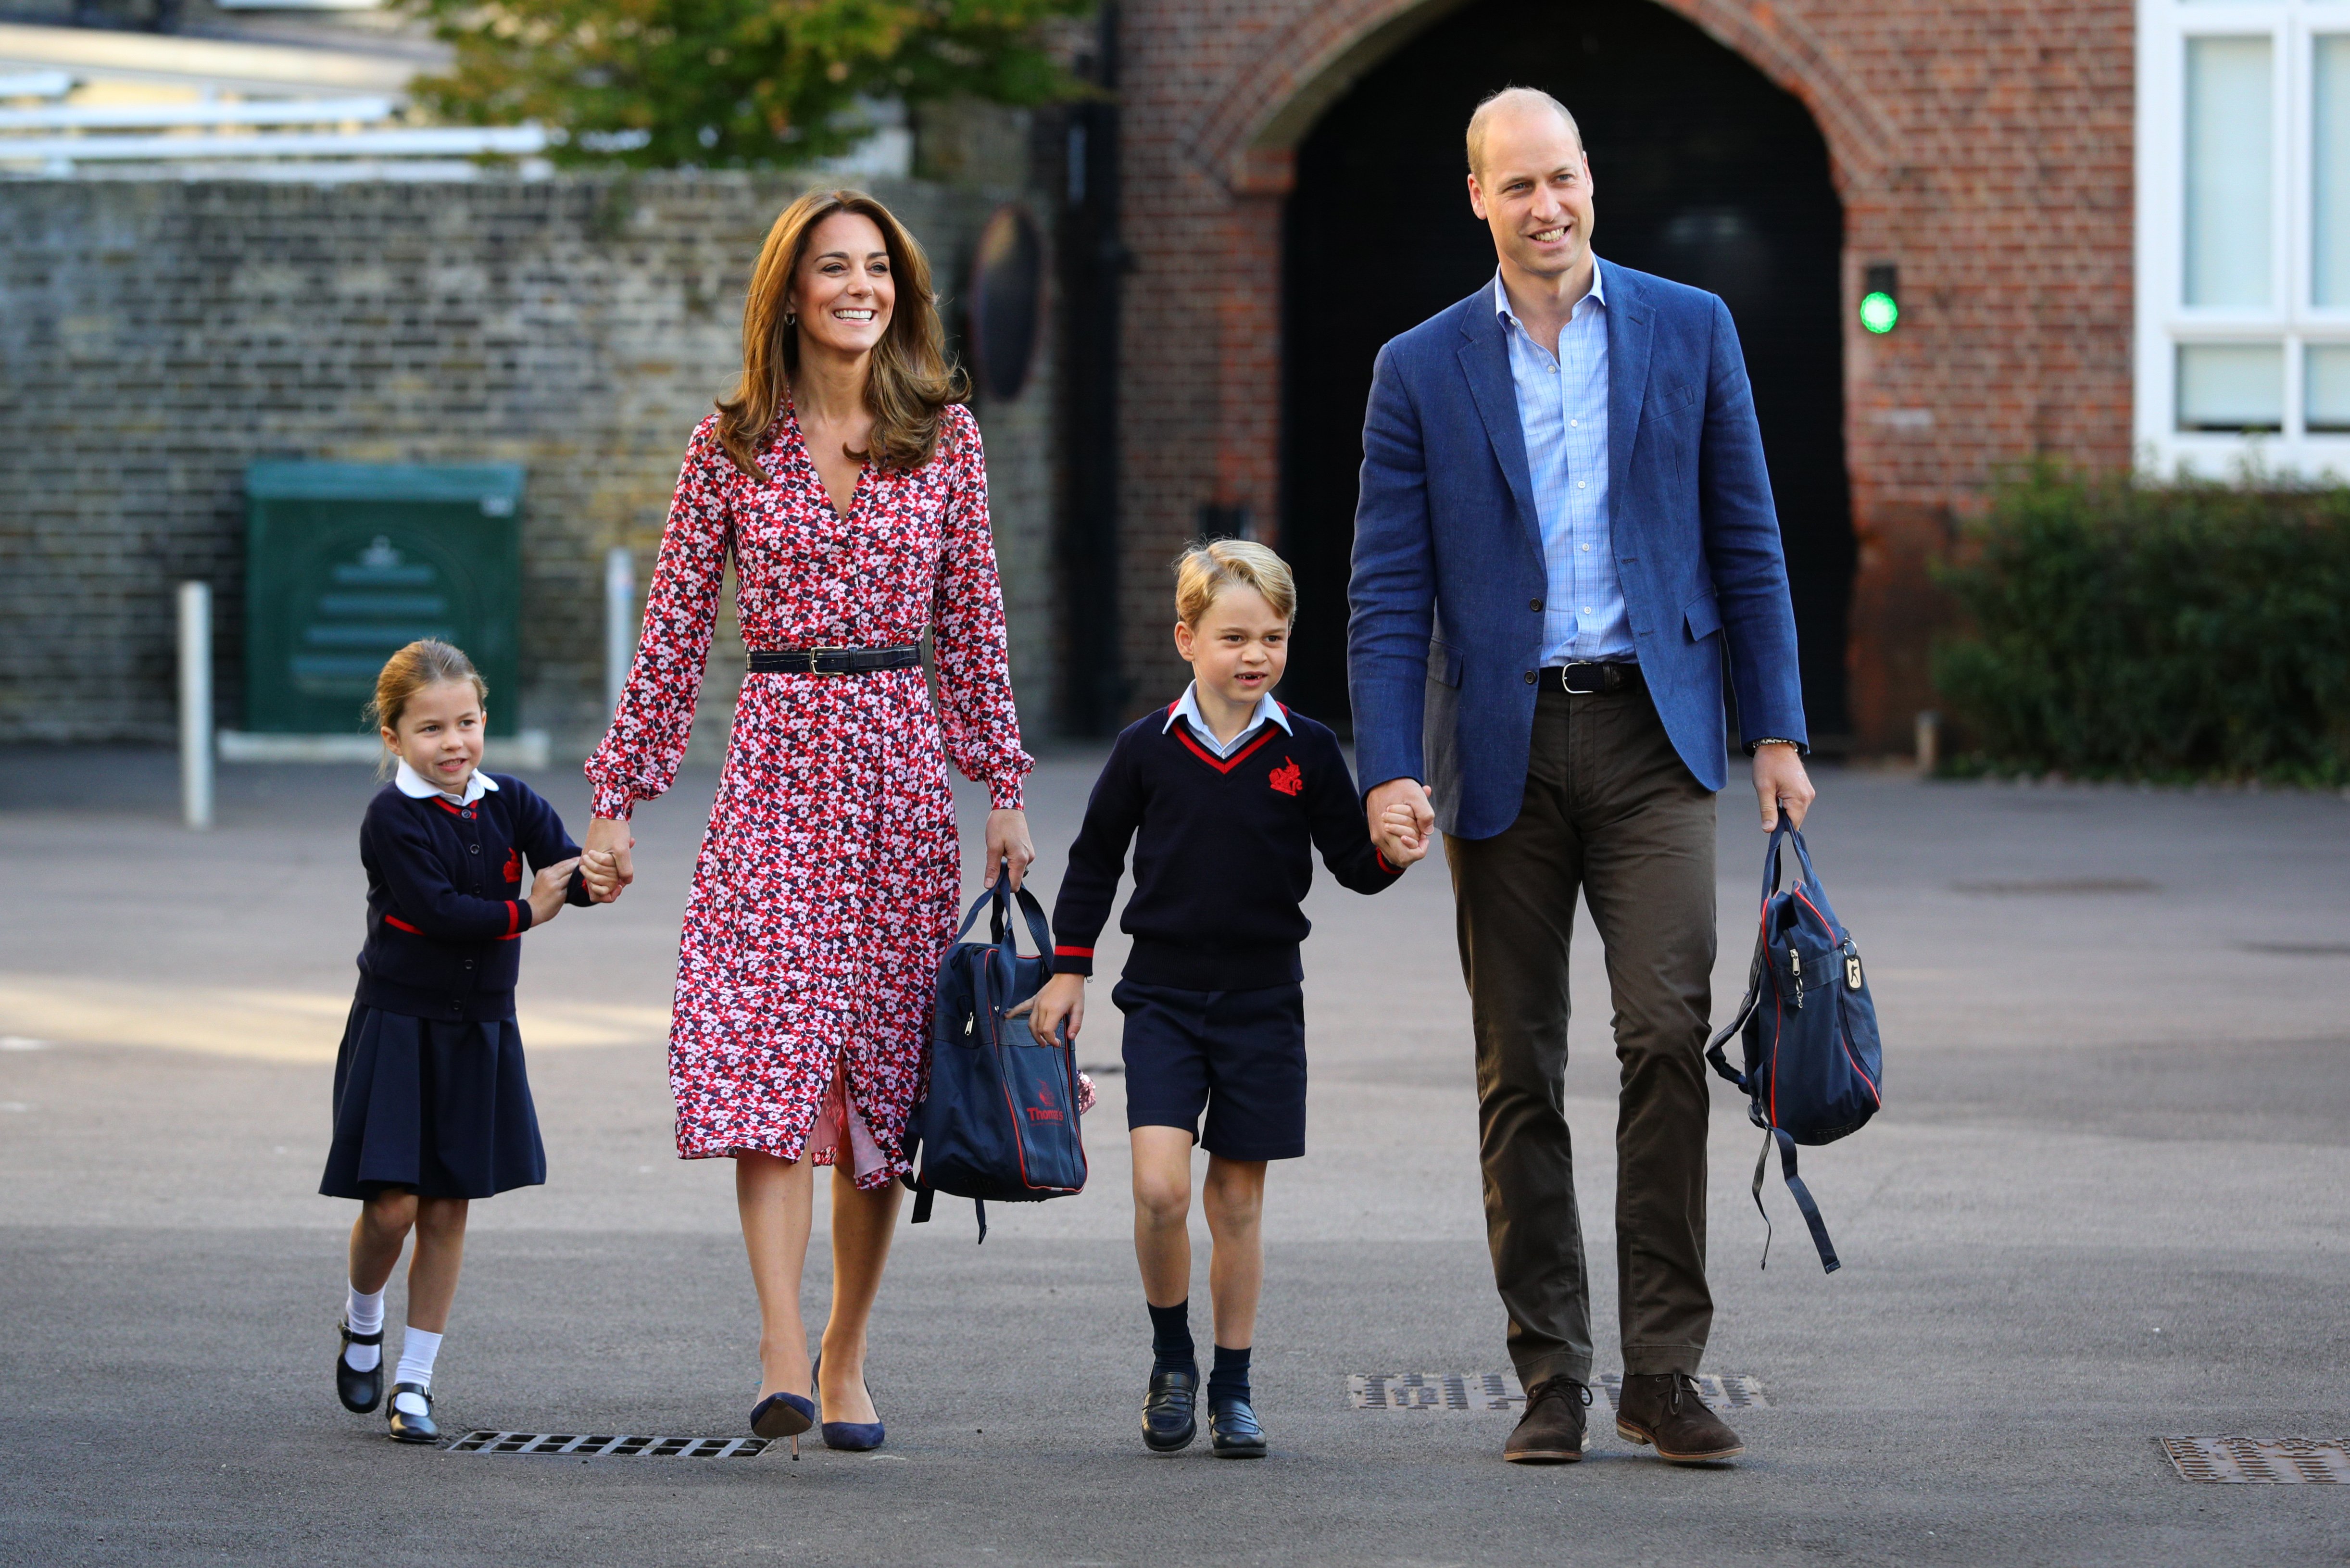 Princess Charlotte arrives for her first day of school, with her brother Prince George and her parents the Prince and Princess of Wales, at Thomas's Battersea in London on September 5, 2019 in London, England. | Source: Getty Images